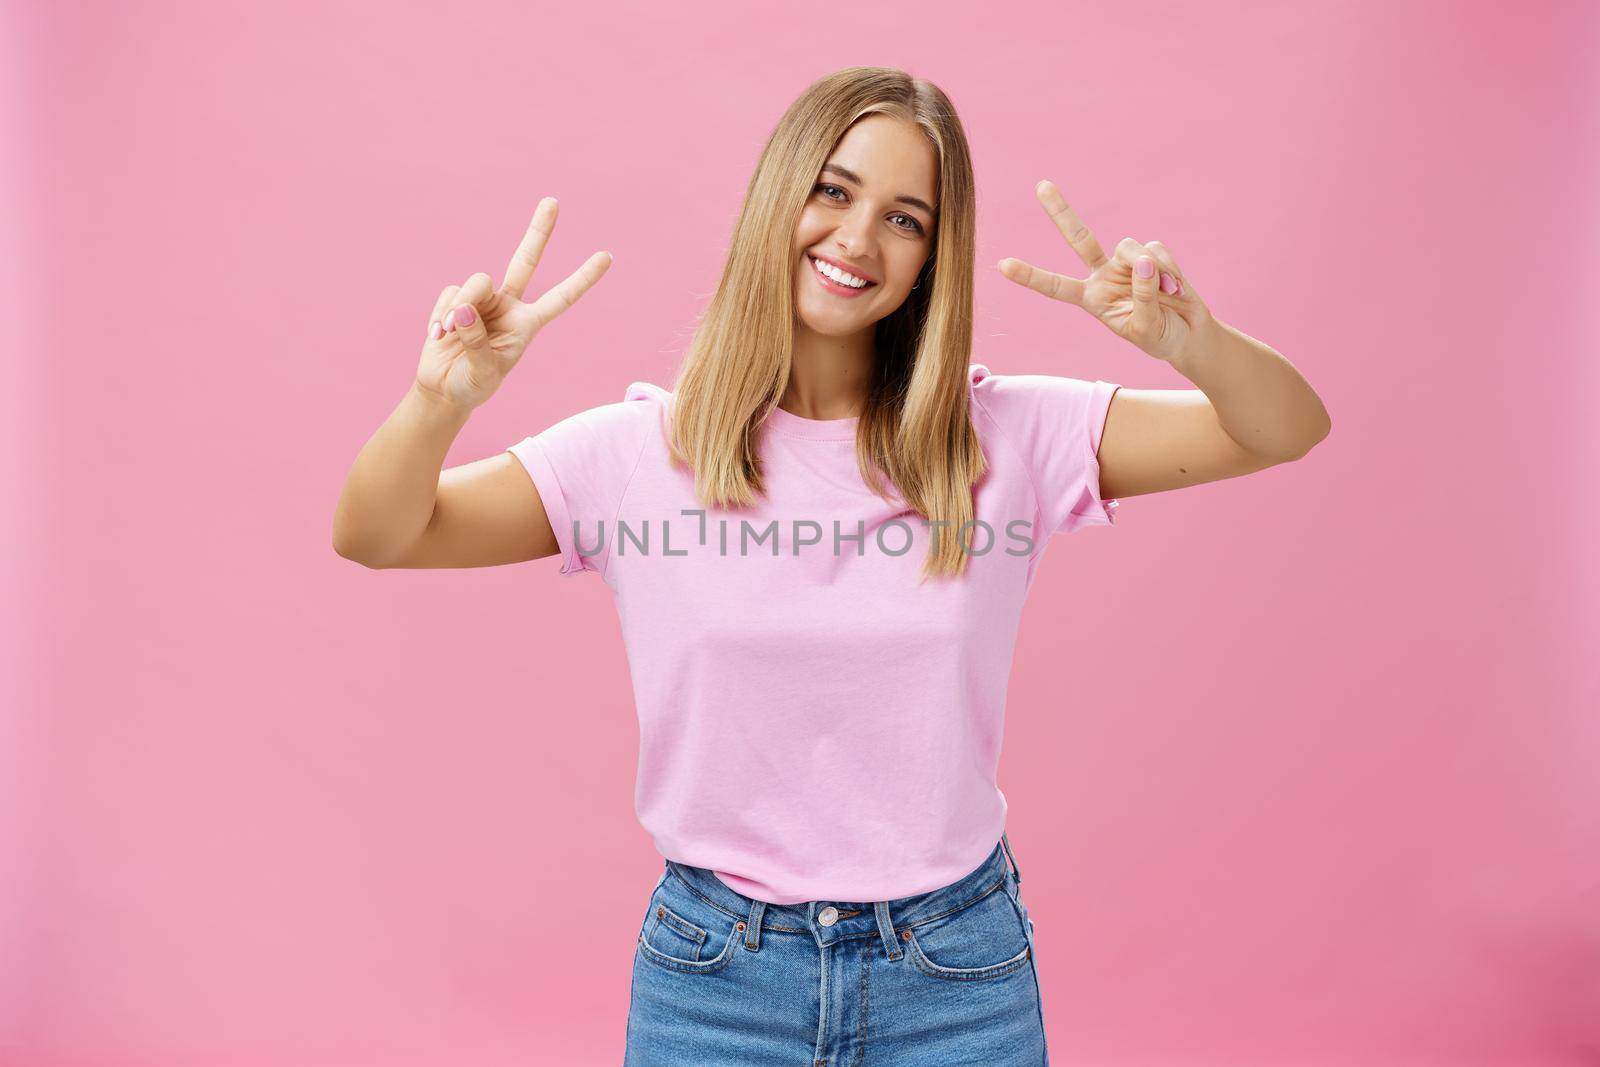 Cute chubby carefree young woman with short fair hair tilting head showing peace gestures with happy friendly smile having fun spending time amused and joyful against pink background by Benzoix